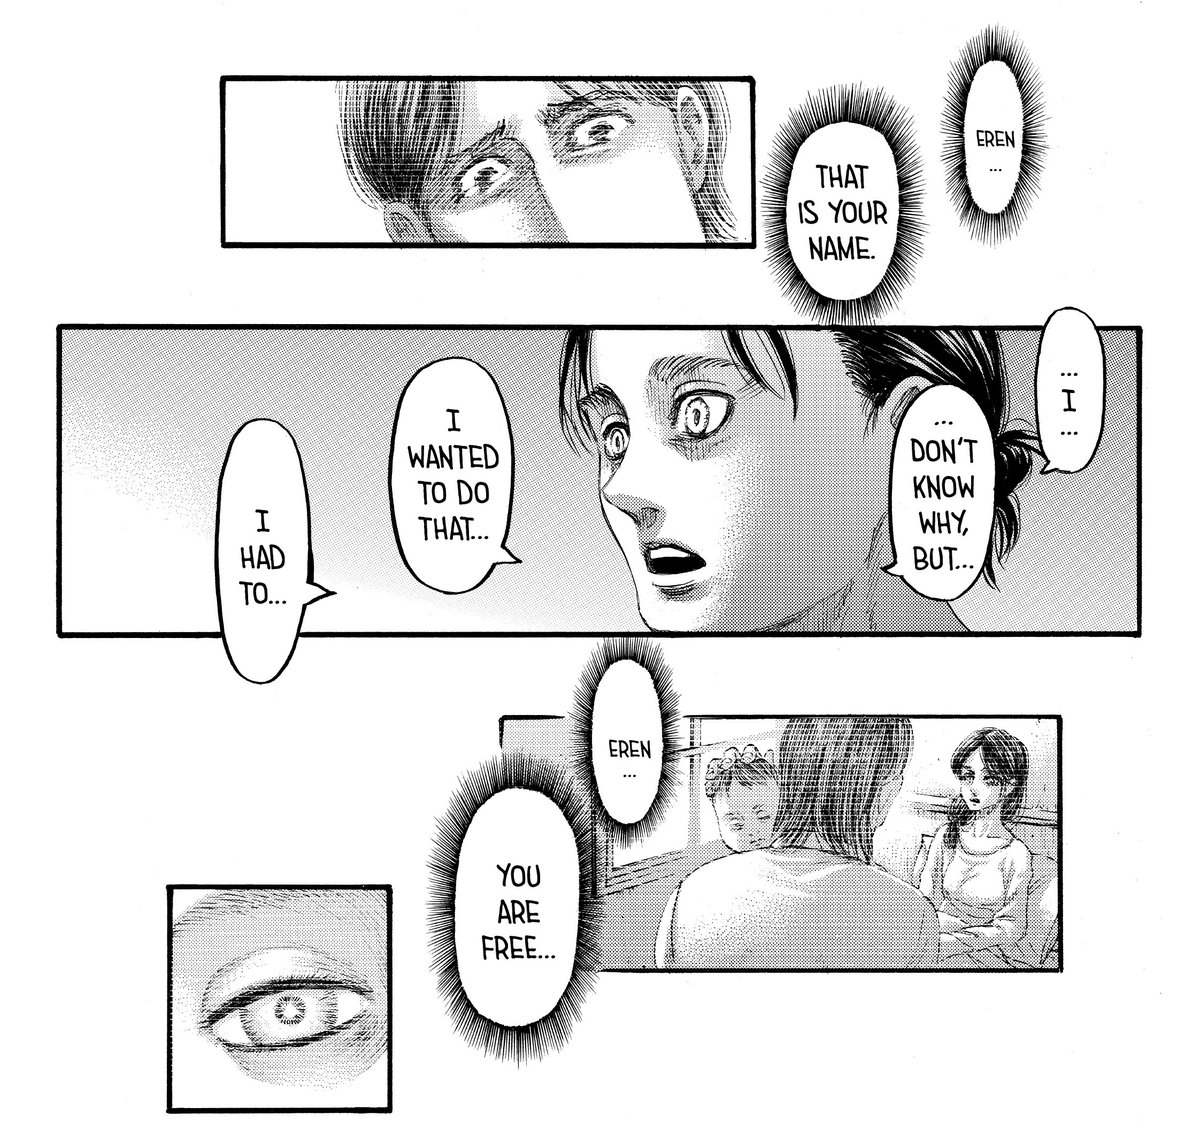 The third part is the part that brings out the core aspects of Eren’s character. The part that craves for freedom. The dark, twisted and cruel form of freedom that was always a part of his character since the moment he was born